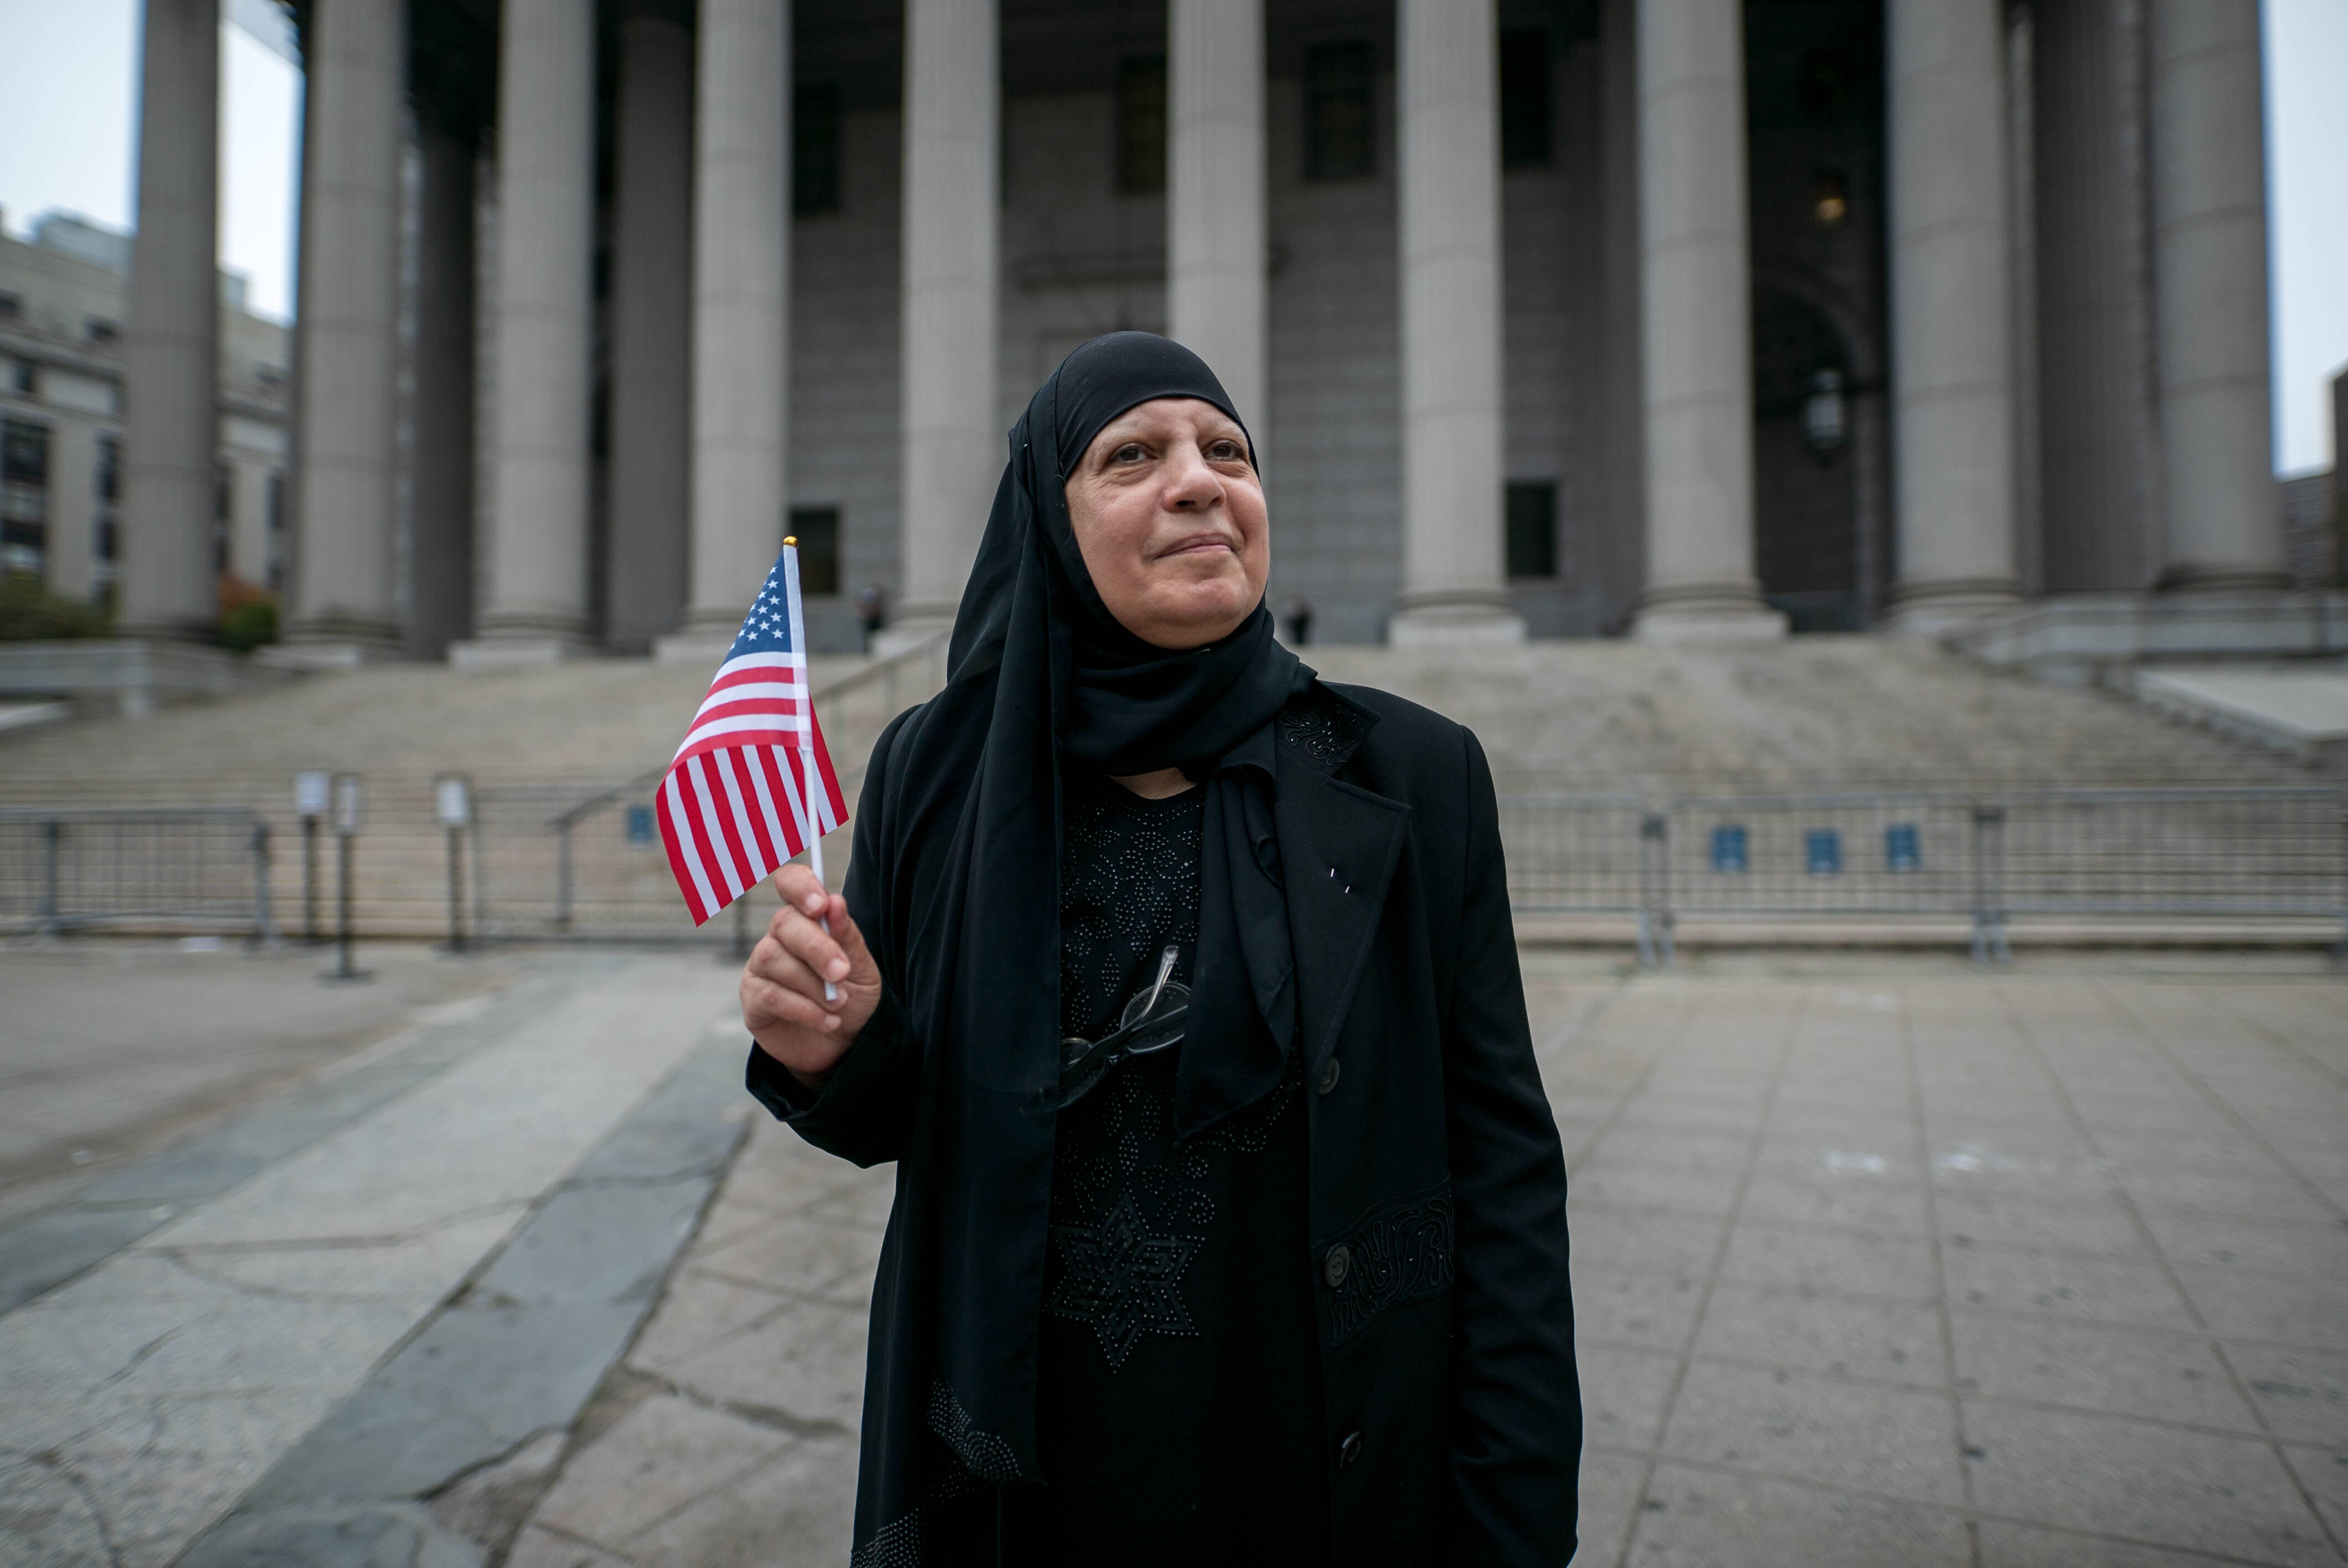 Maha al-Obaidi stands in front of a government building holding an American flag. 